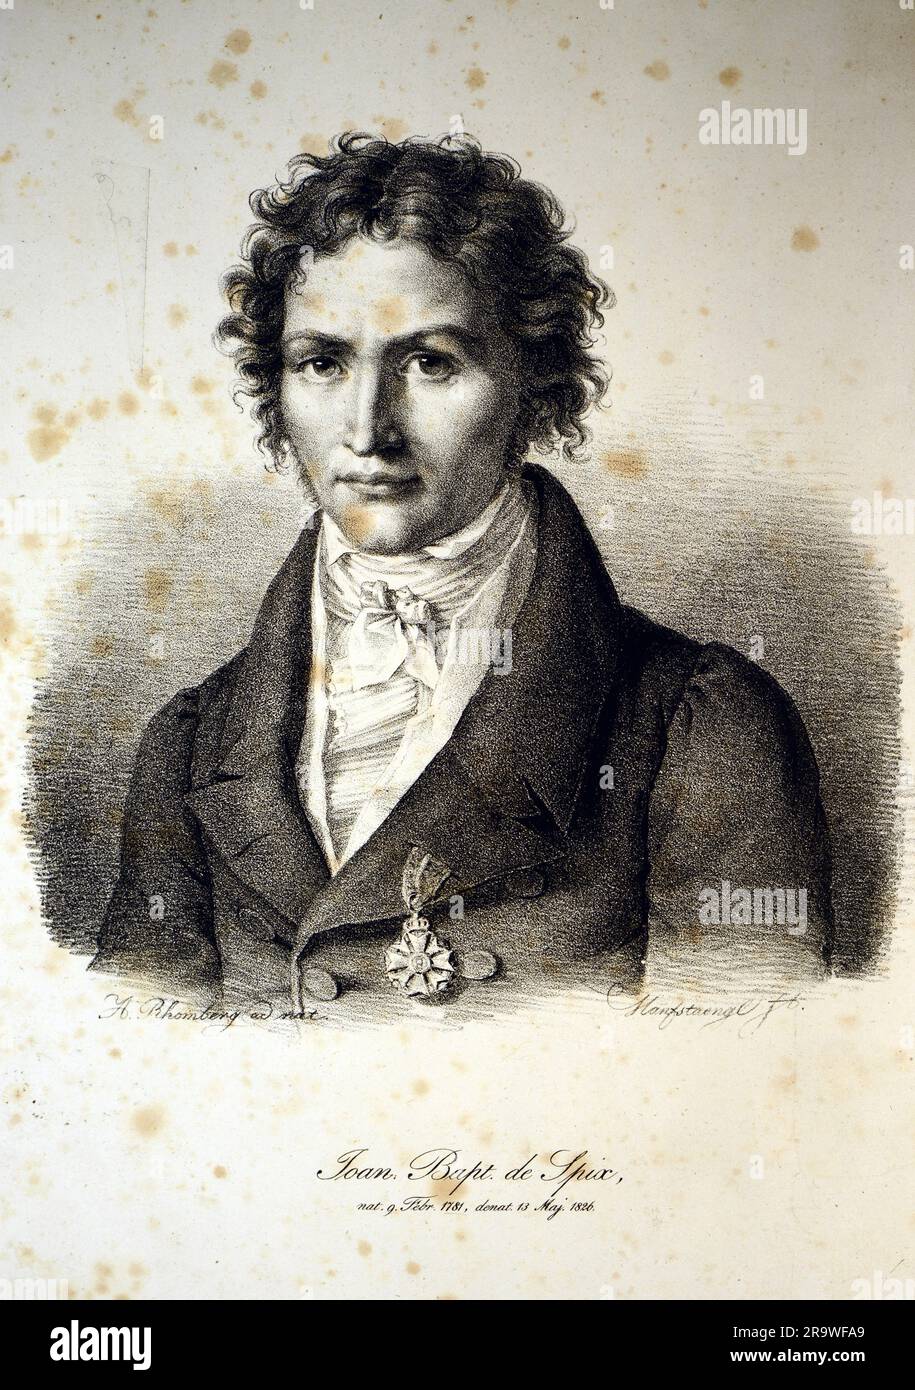 Spix, Johann Baptist von, 9.2.1781 - 13.3.1826, German natural scientist, portrait, drawing, ADDITIONAL-RIGHTS-CLEARANCE-INFO-NOT-AVAILABLE Stock Photo